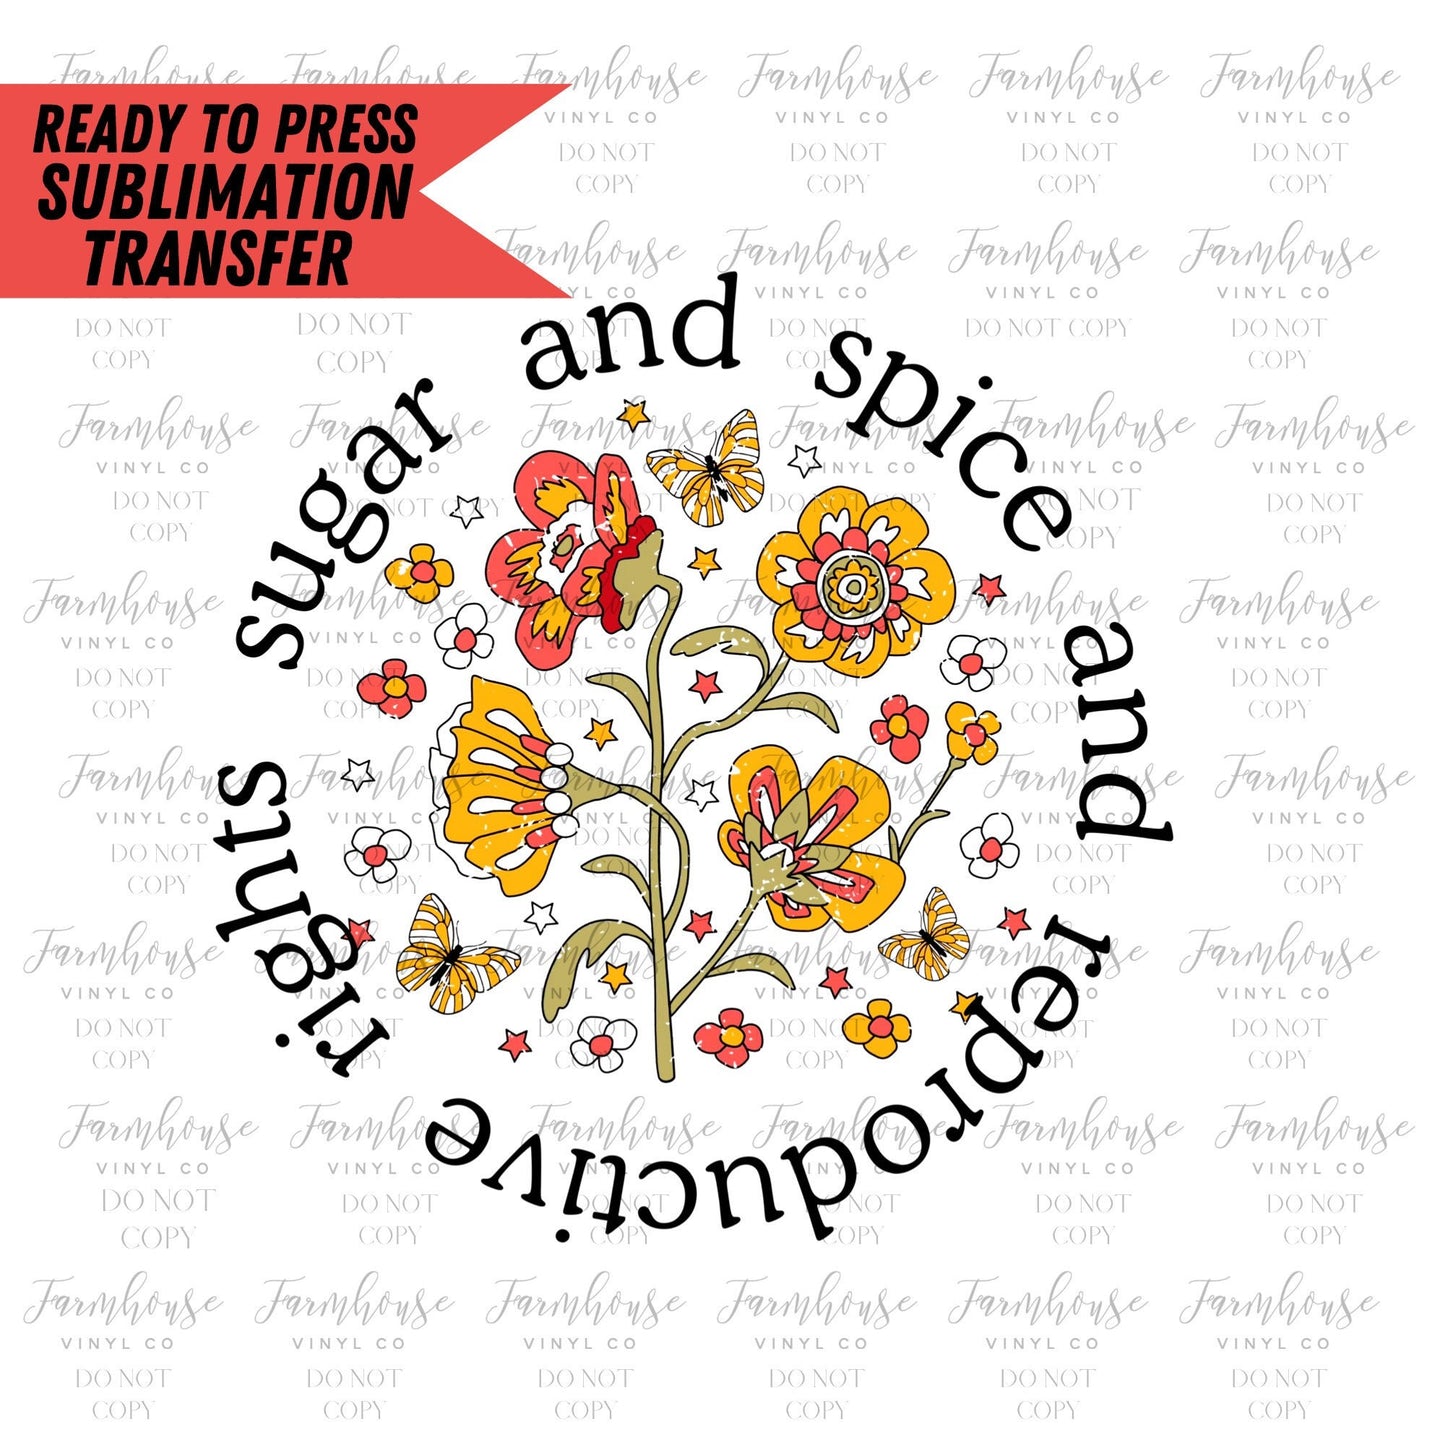 Sugar & Spice and Reproductive Rights, Ready To Press, Sublimation Transfers, Sublimation Print, Transfer Ready To Press, BOHO Vintage - Farmhouse Vinyl Co